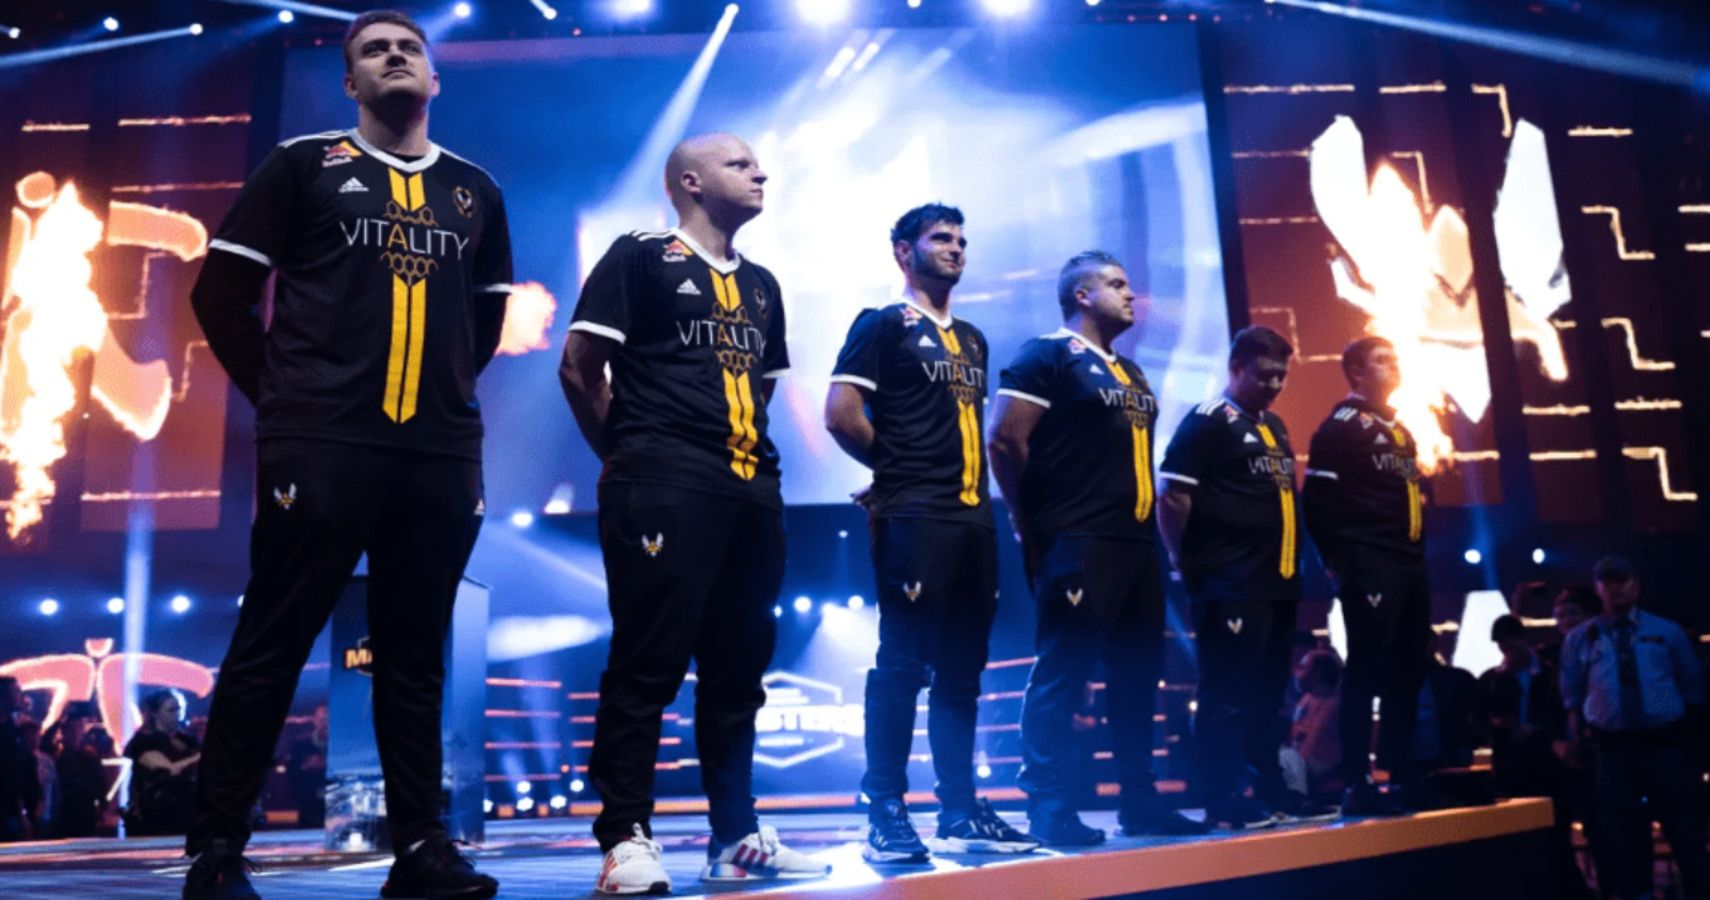 VALORANT Reveals Deathmatch And Ranked Standings And Team Vitality Hosts Esports Showdown